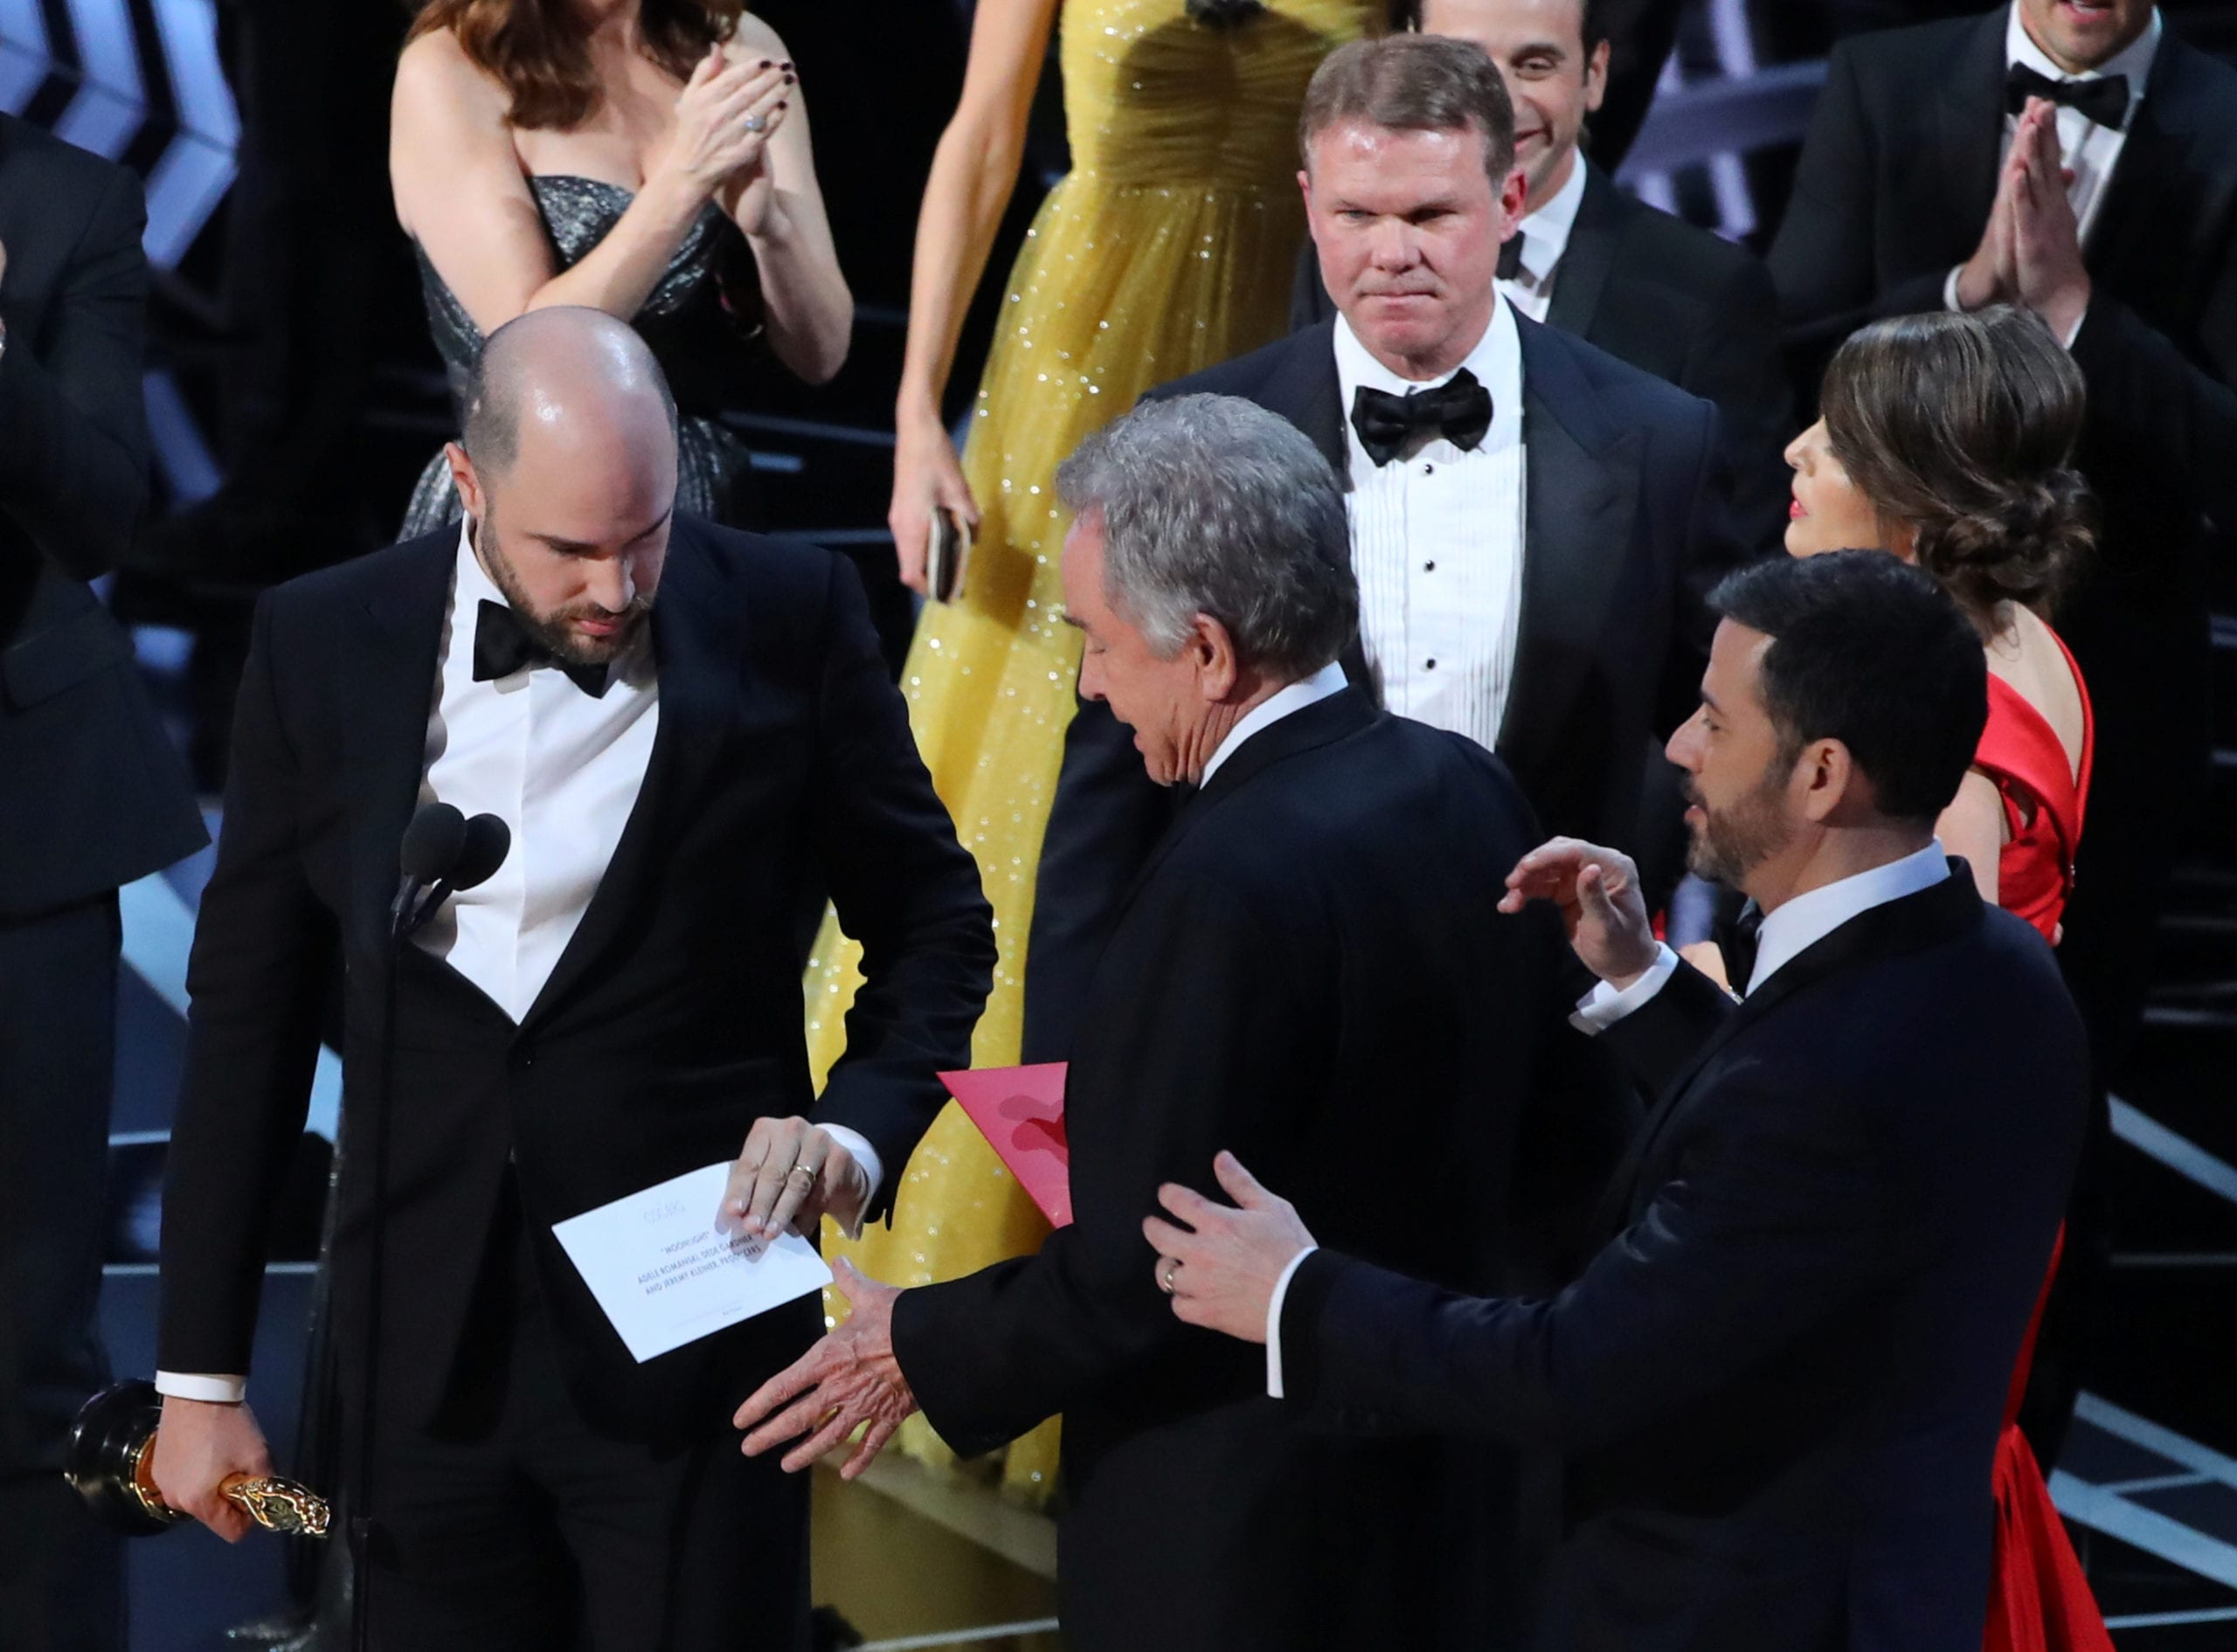 89th Academy Awards - Oscars Awards Show - Hollywood, California, U.S. - 26/02/17 - Martha Ruiz (R, in red) and Brian Cullinan (upper R) of PricewaterhouseCoopers confer on stage after the Best Picture was mistakenly awarded to "La La Land" instead of "Moonlight". Accountants PricewaterhouseCoopers, who oversee the ballots, said presenters Warren Beatty (C) and Faye Dunaway (not pictured) had mistakenly been given the wrong category envelope. At right is host Jimmy Kimmel and at left is "La La Land" producer Jordan Horowitz, holding the correct envelope for Best Picture. REUTERS/Lucy Nicholson     TPX IMAGES OF THE DAY - RC1AC0E51F10